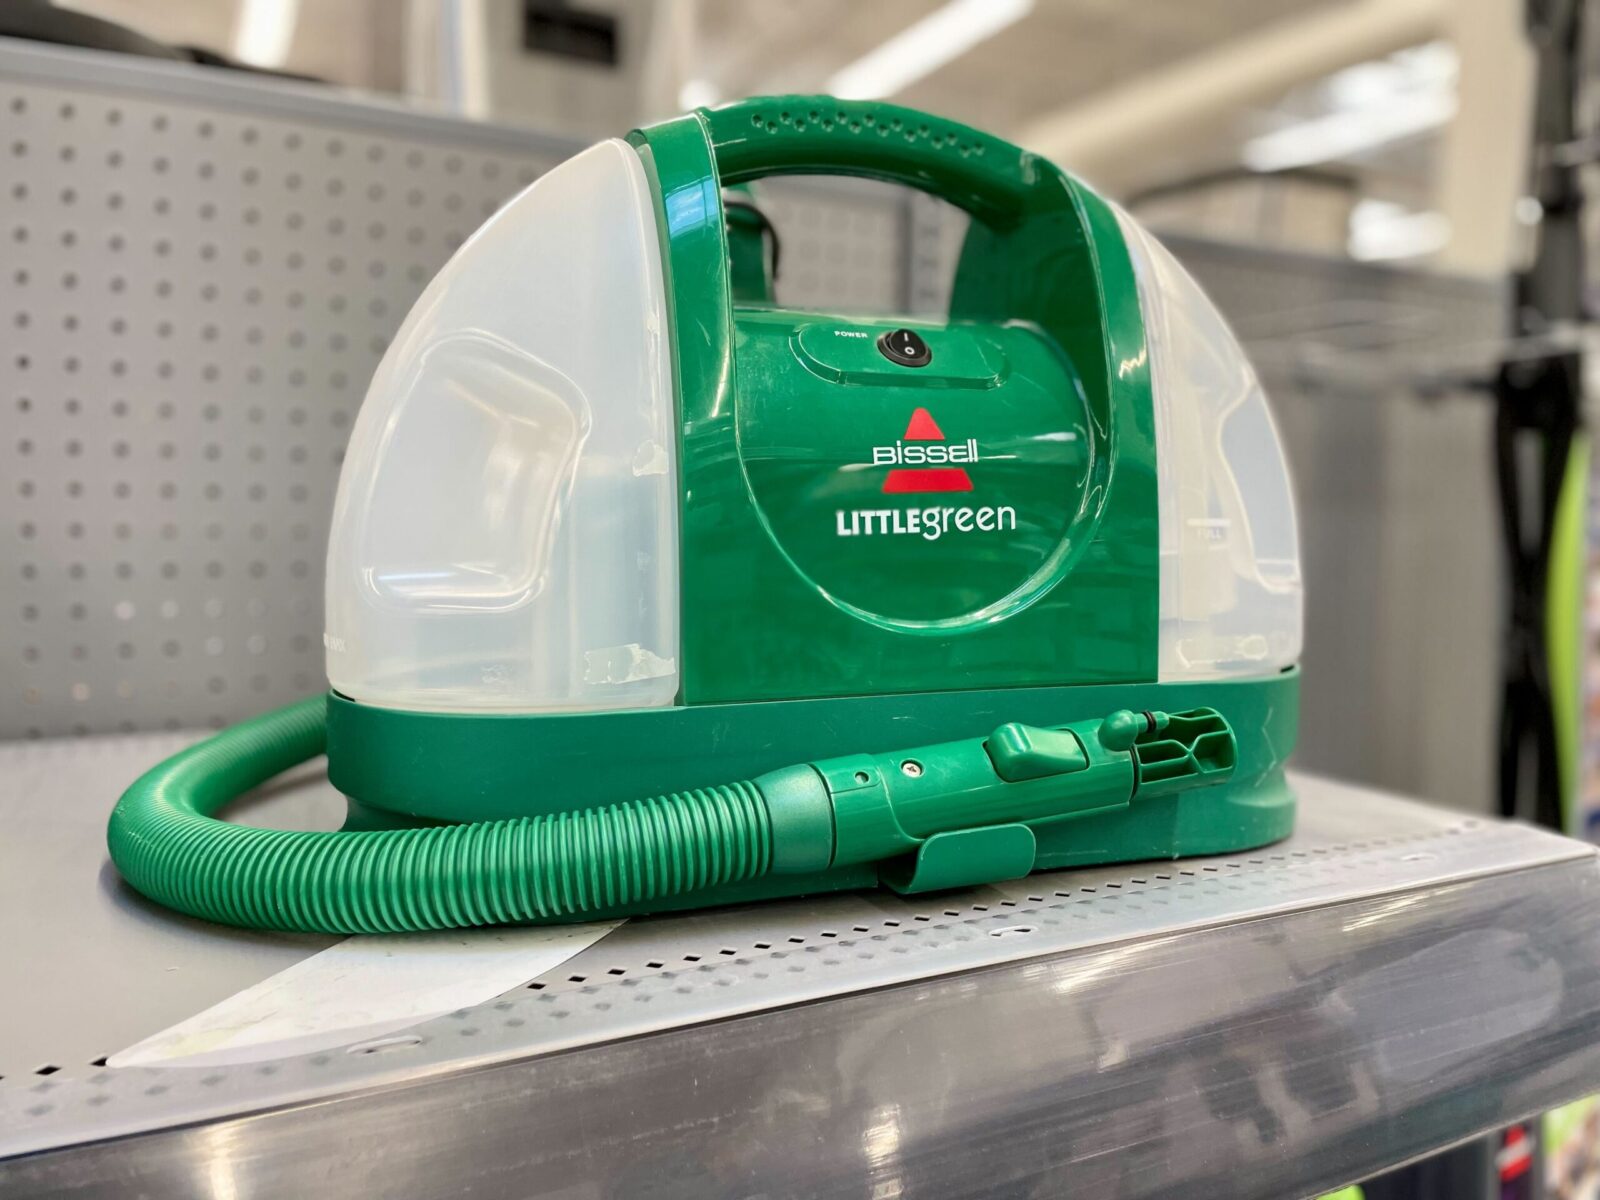 bissell little green scaled 1 - BISSELL Little Green Portable Spot & Stain Cleaner $89 Shipped (Reg. $124)